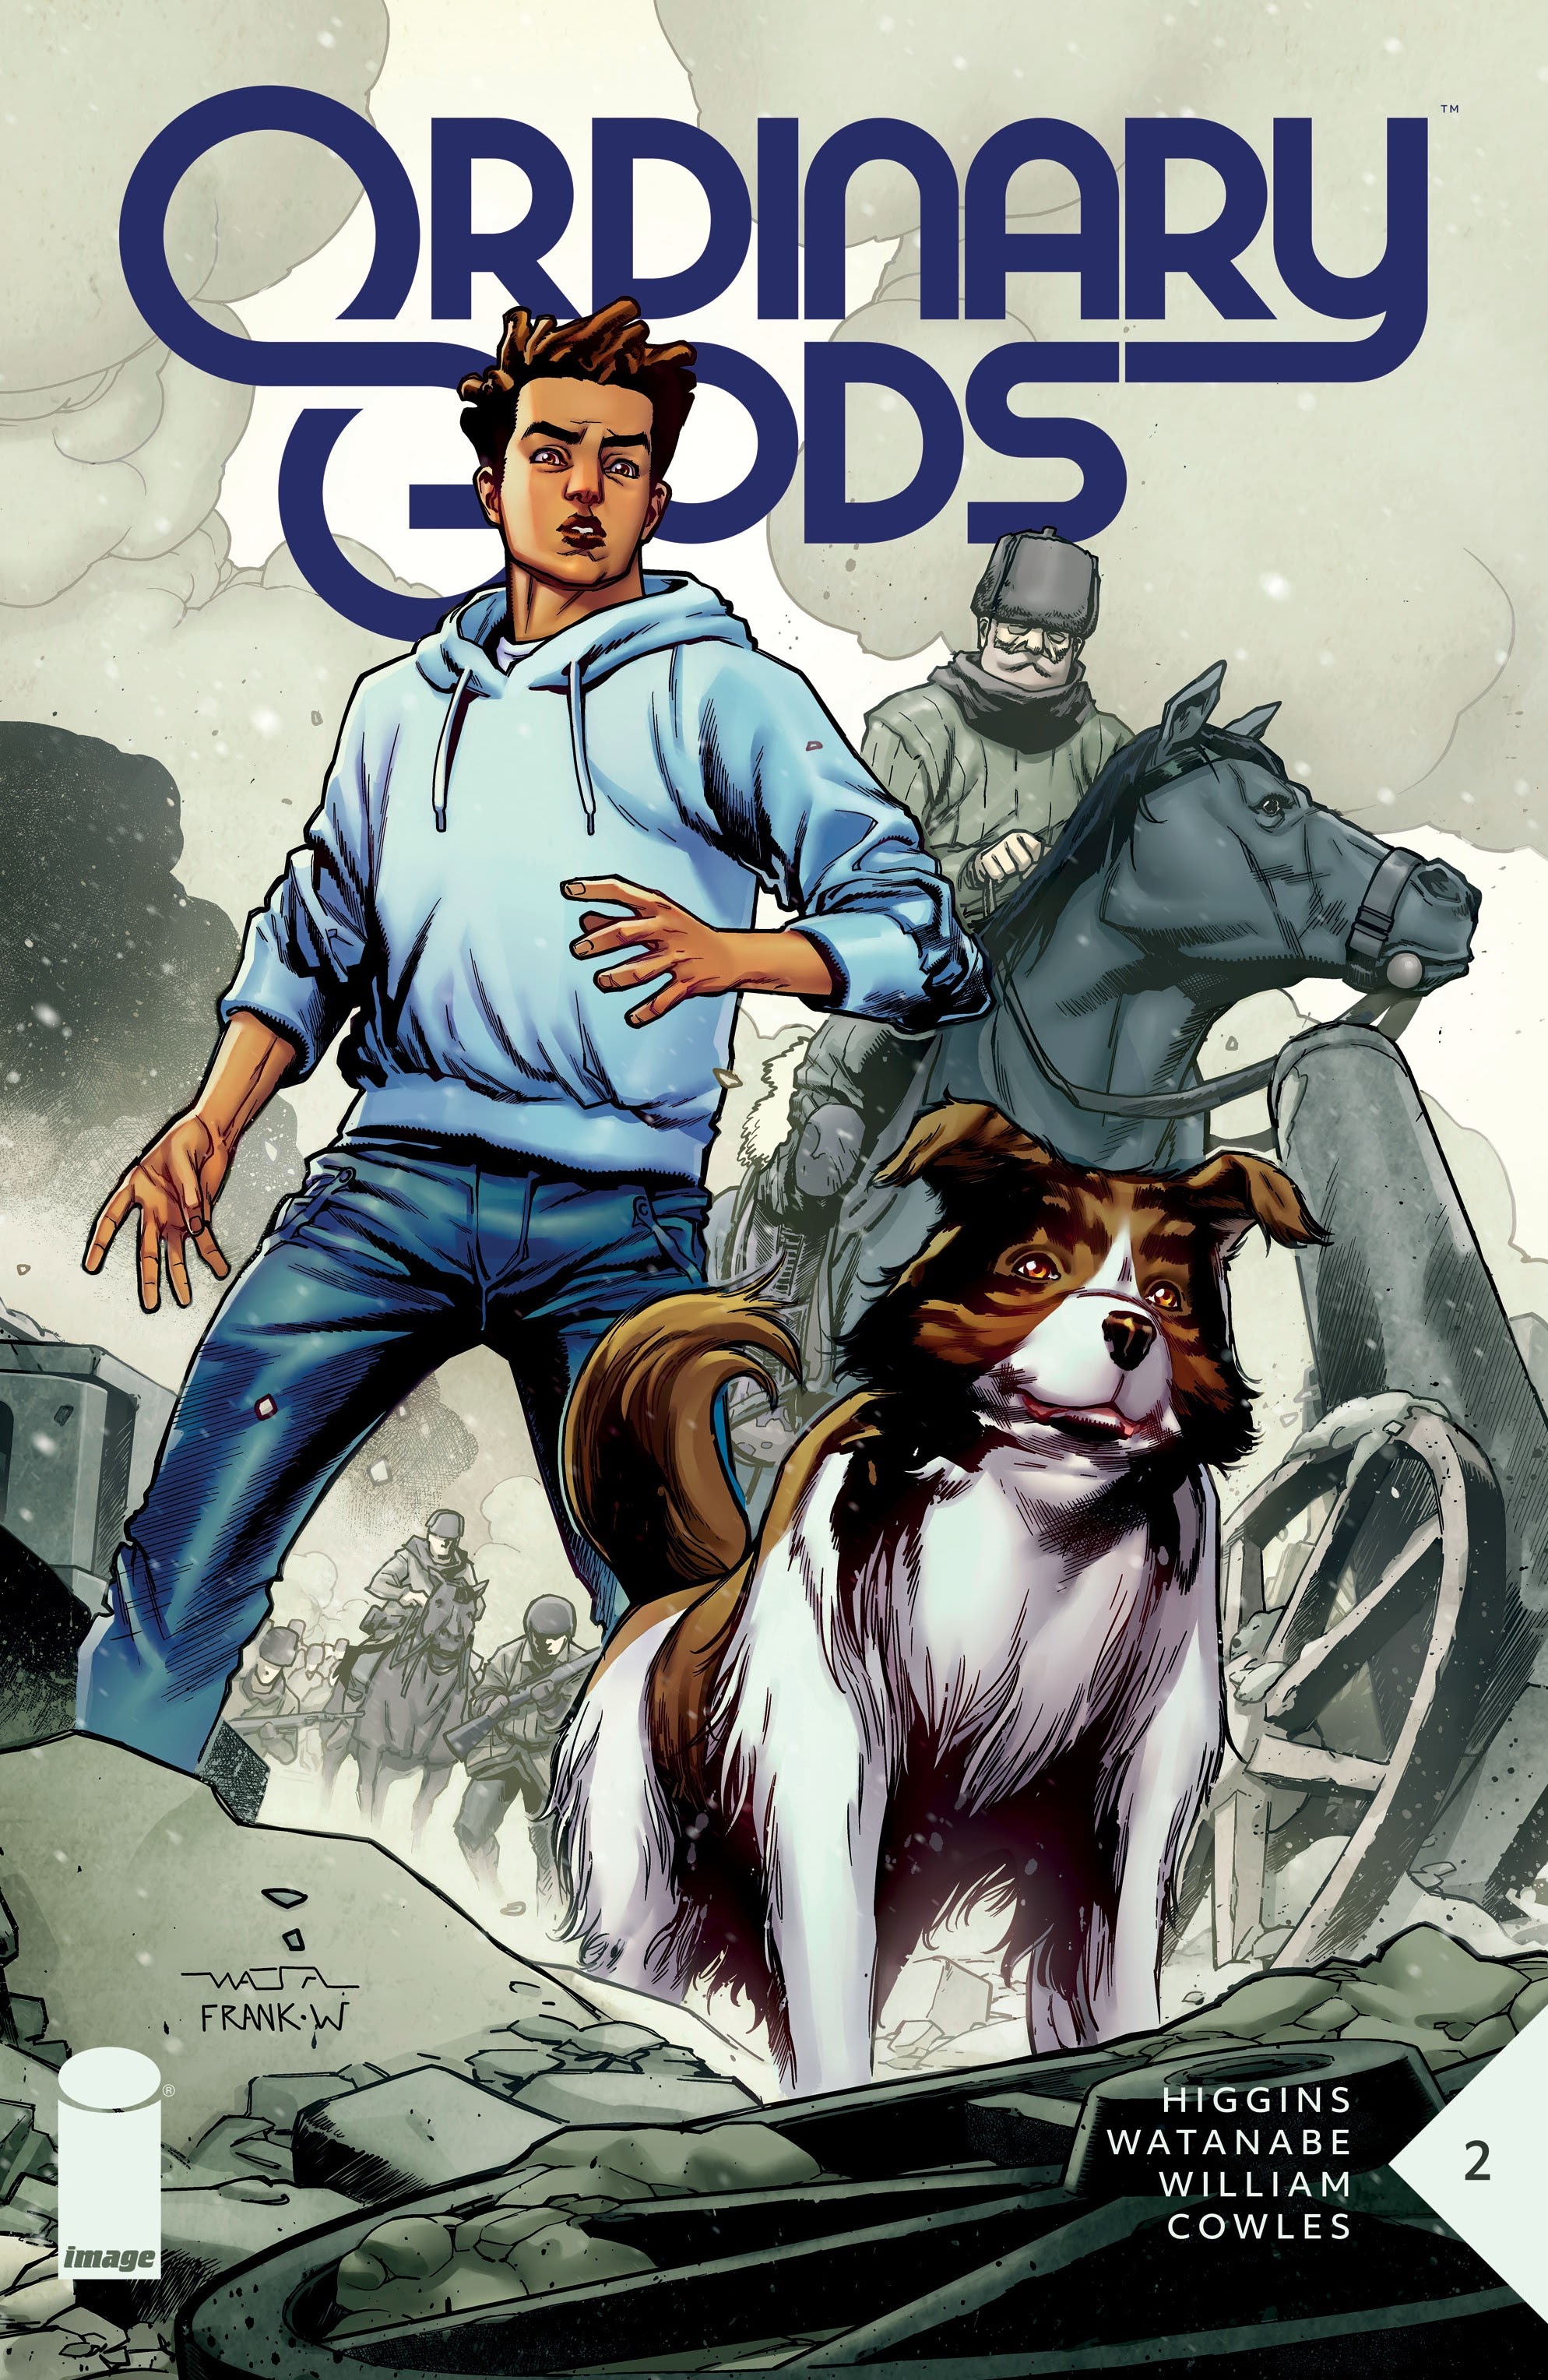 Read online Ordinary Gods comic -  Issue #2 - 1